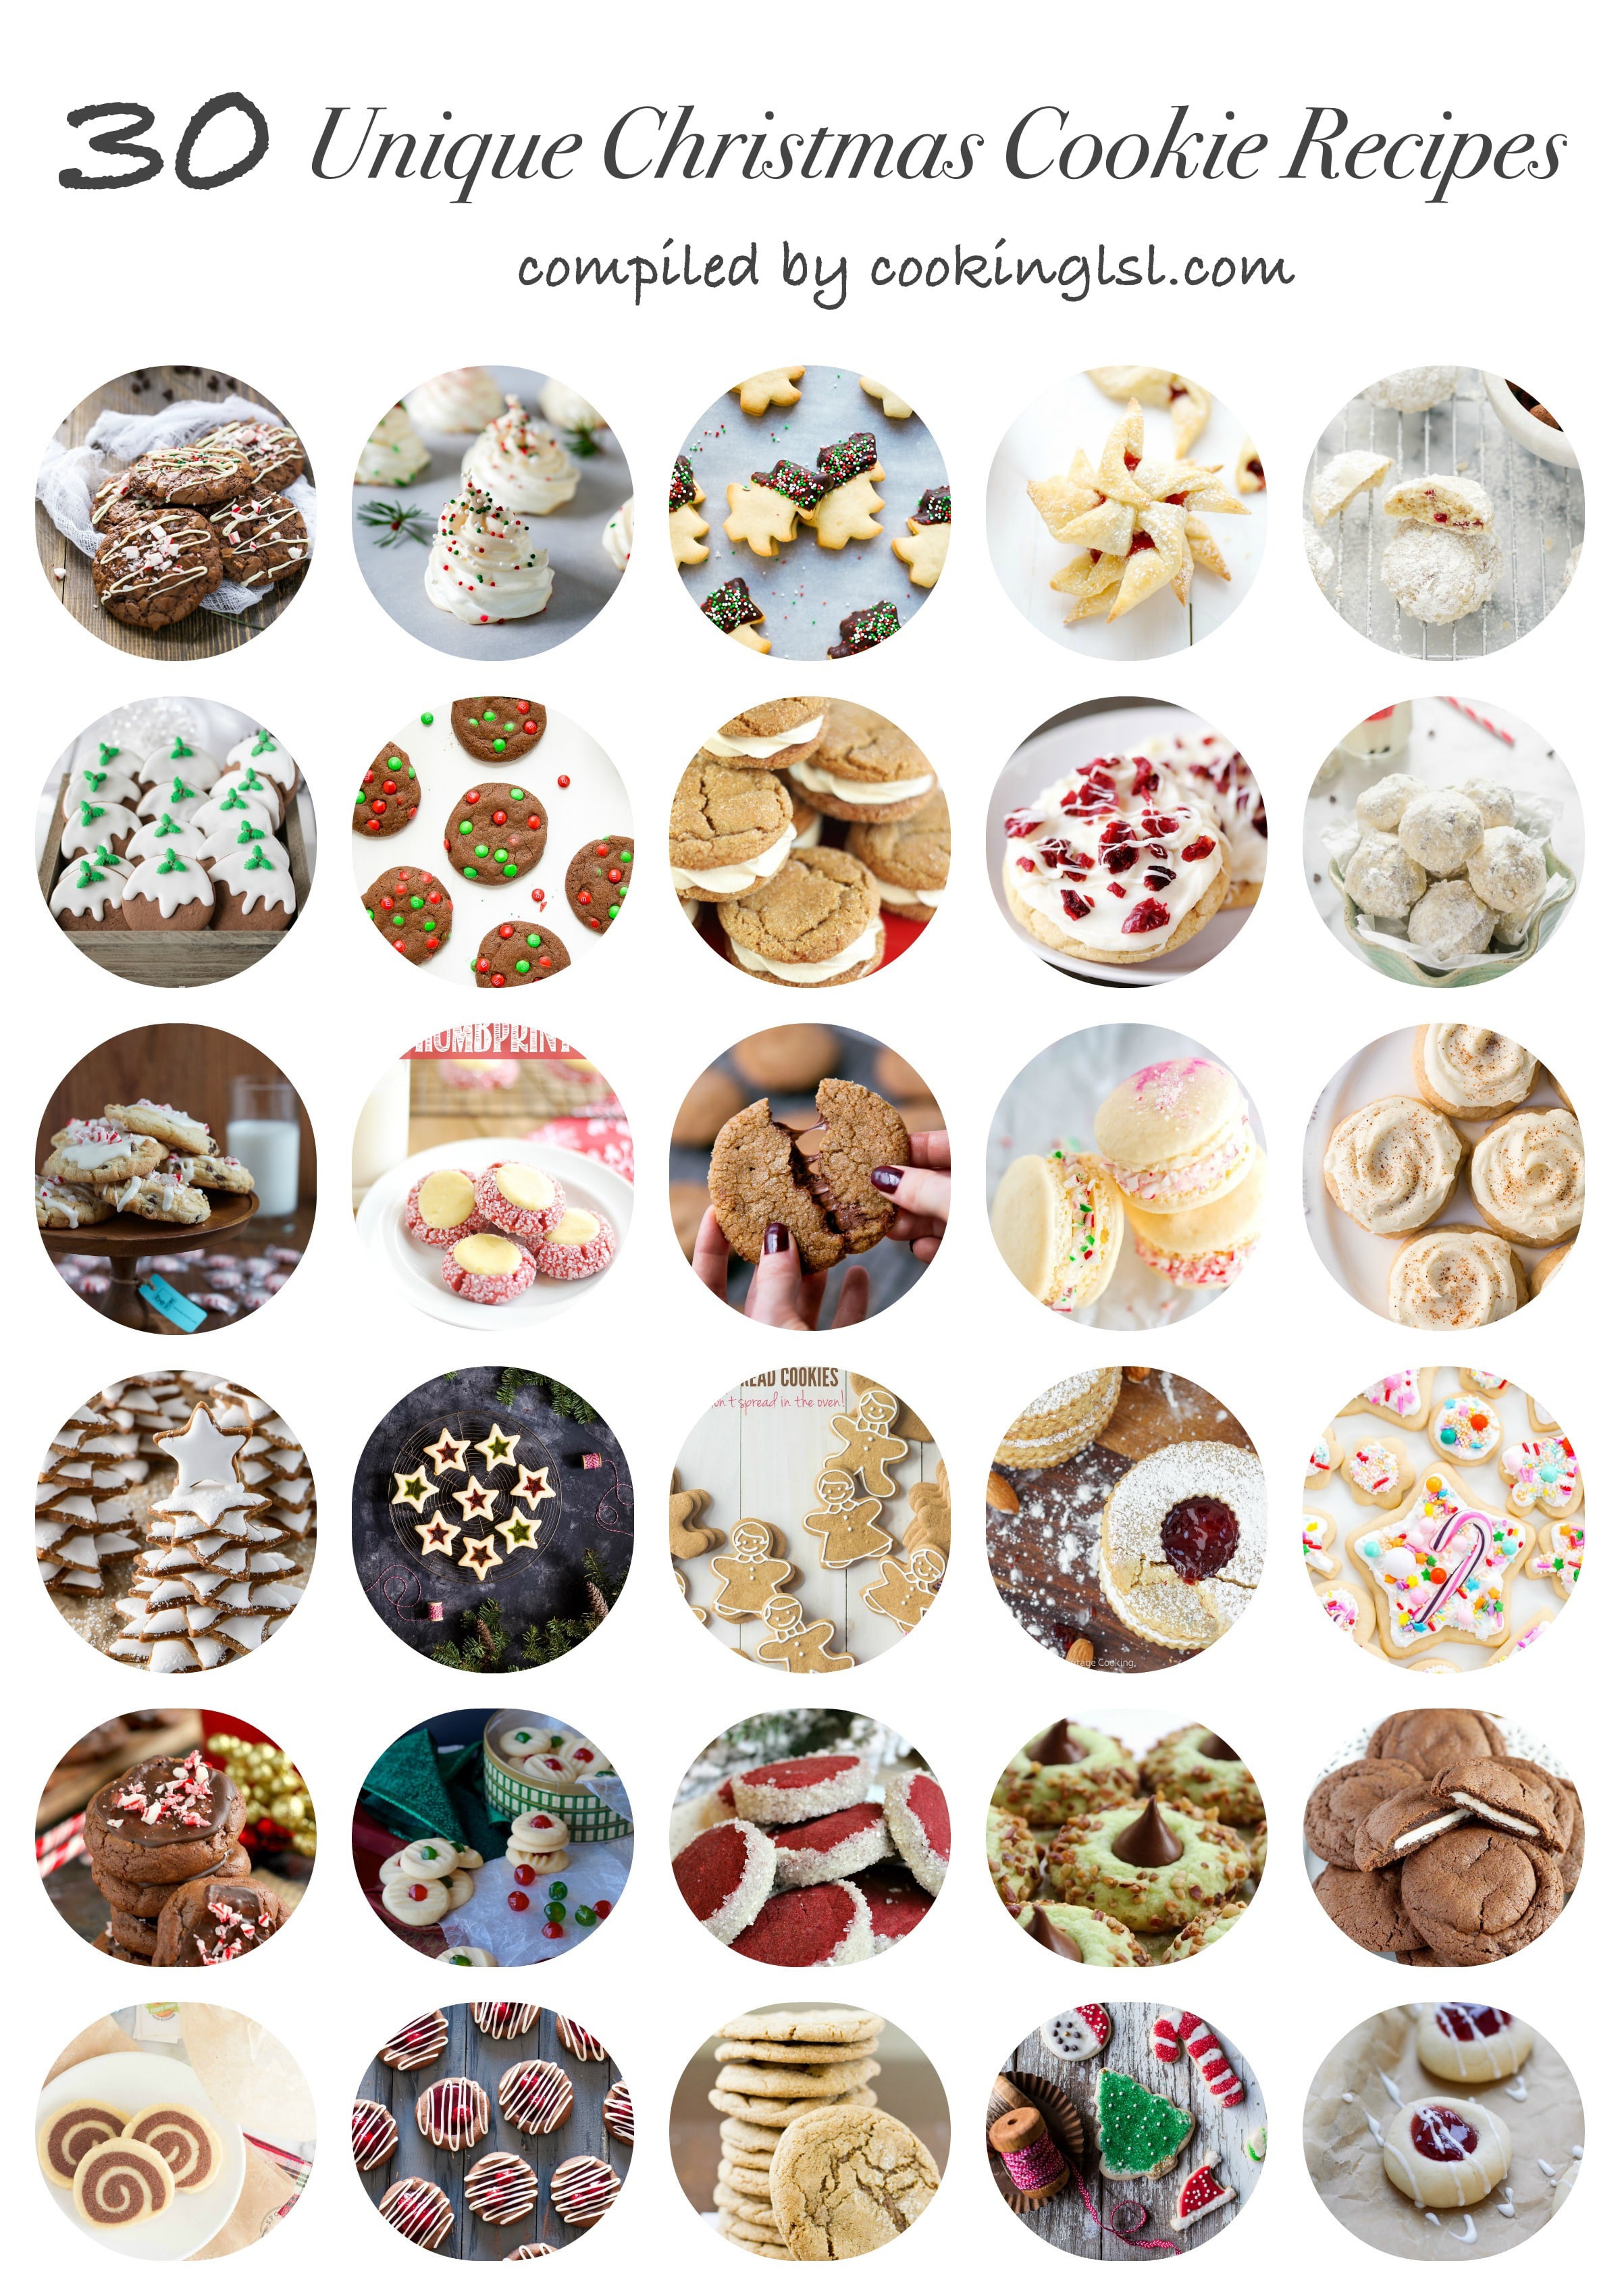 Special Christmas Cookies
 30 Unique Christmas Cookie Recipes